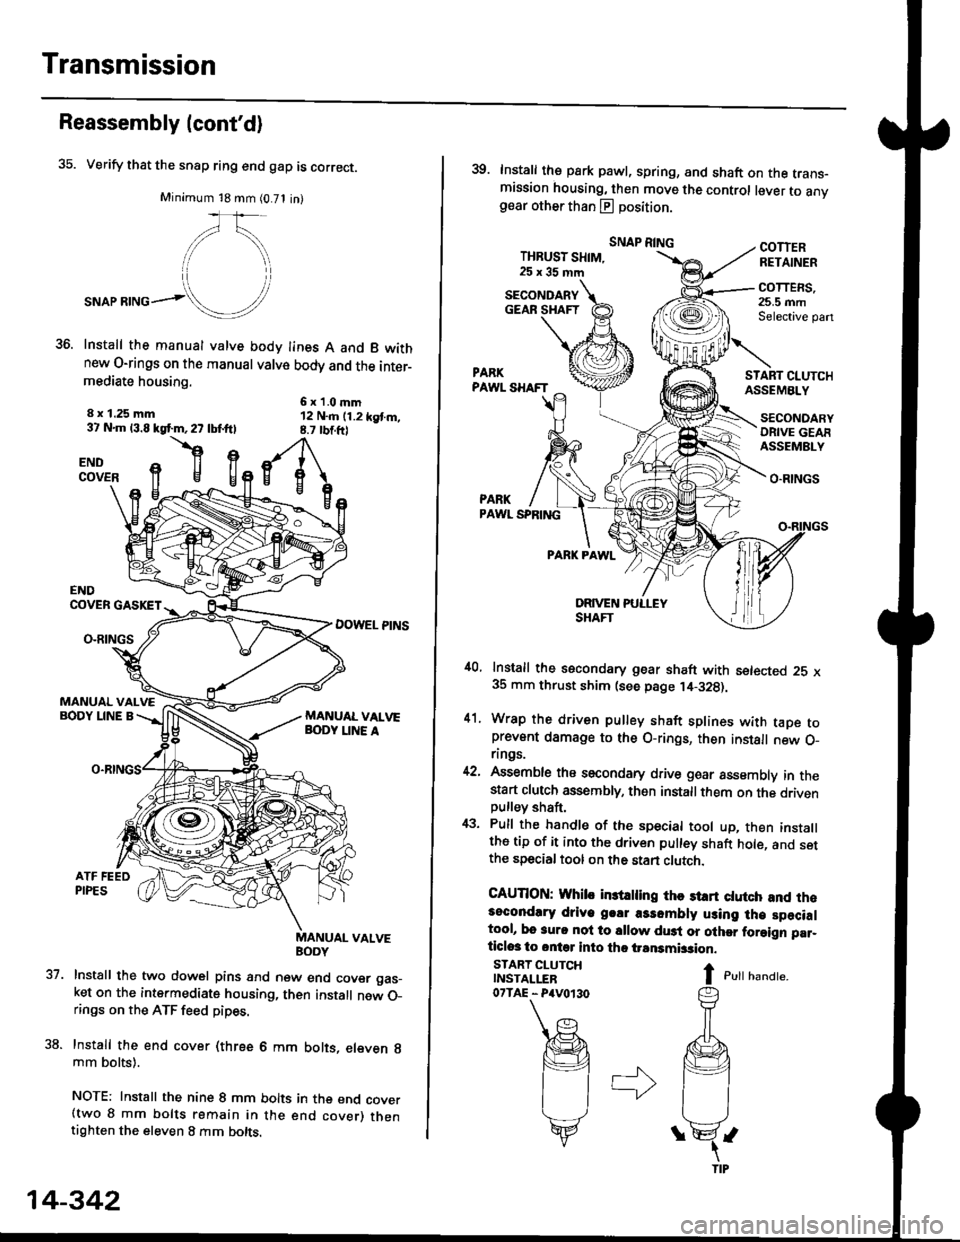 HONDA CIVIC 1996 6.G User Guide Transmission
Reassembly (contd)
35. Verify that the snap ring end gap is correct.
Minimum 18 mm (0.71 in)
,/\,
."or**ol!/
Install the manual valve body lines A and B wkhnew O-rings on the manual val